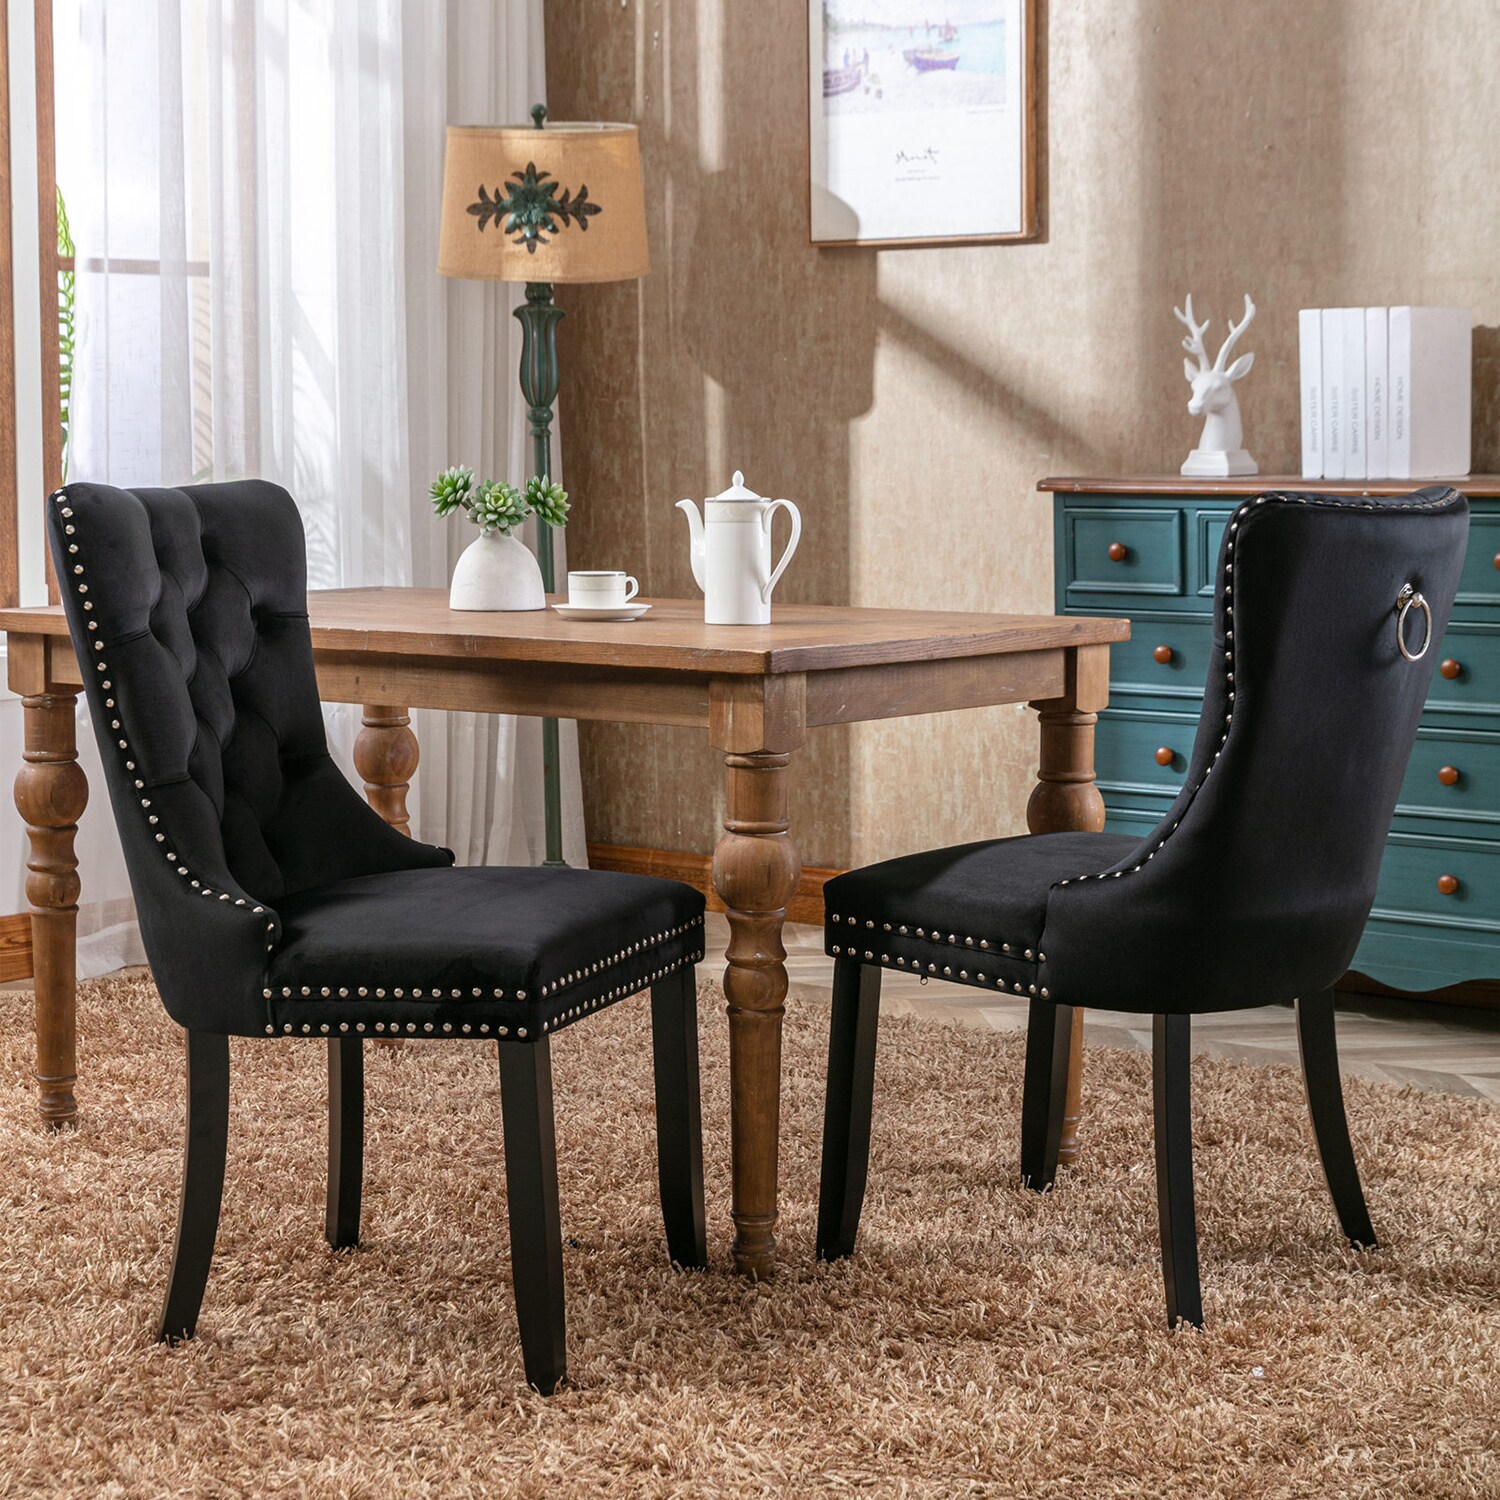 Side Chair 2-Pcs Upholstered Dining department at Contemporary/Modern Chairs Dining the Frame) Set Dining in Chair (Wood Upholstered Velvet GZMR Velvet